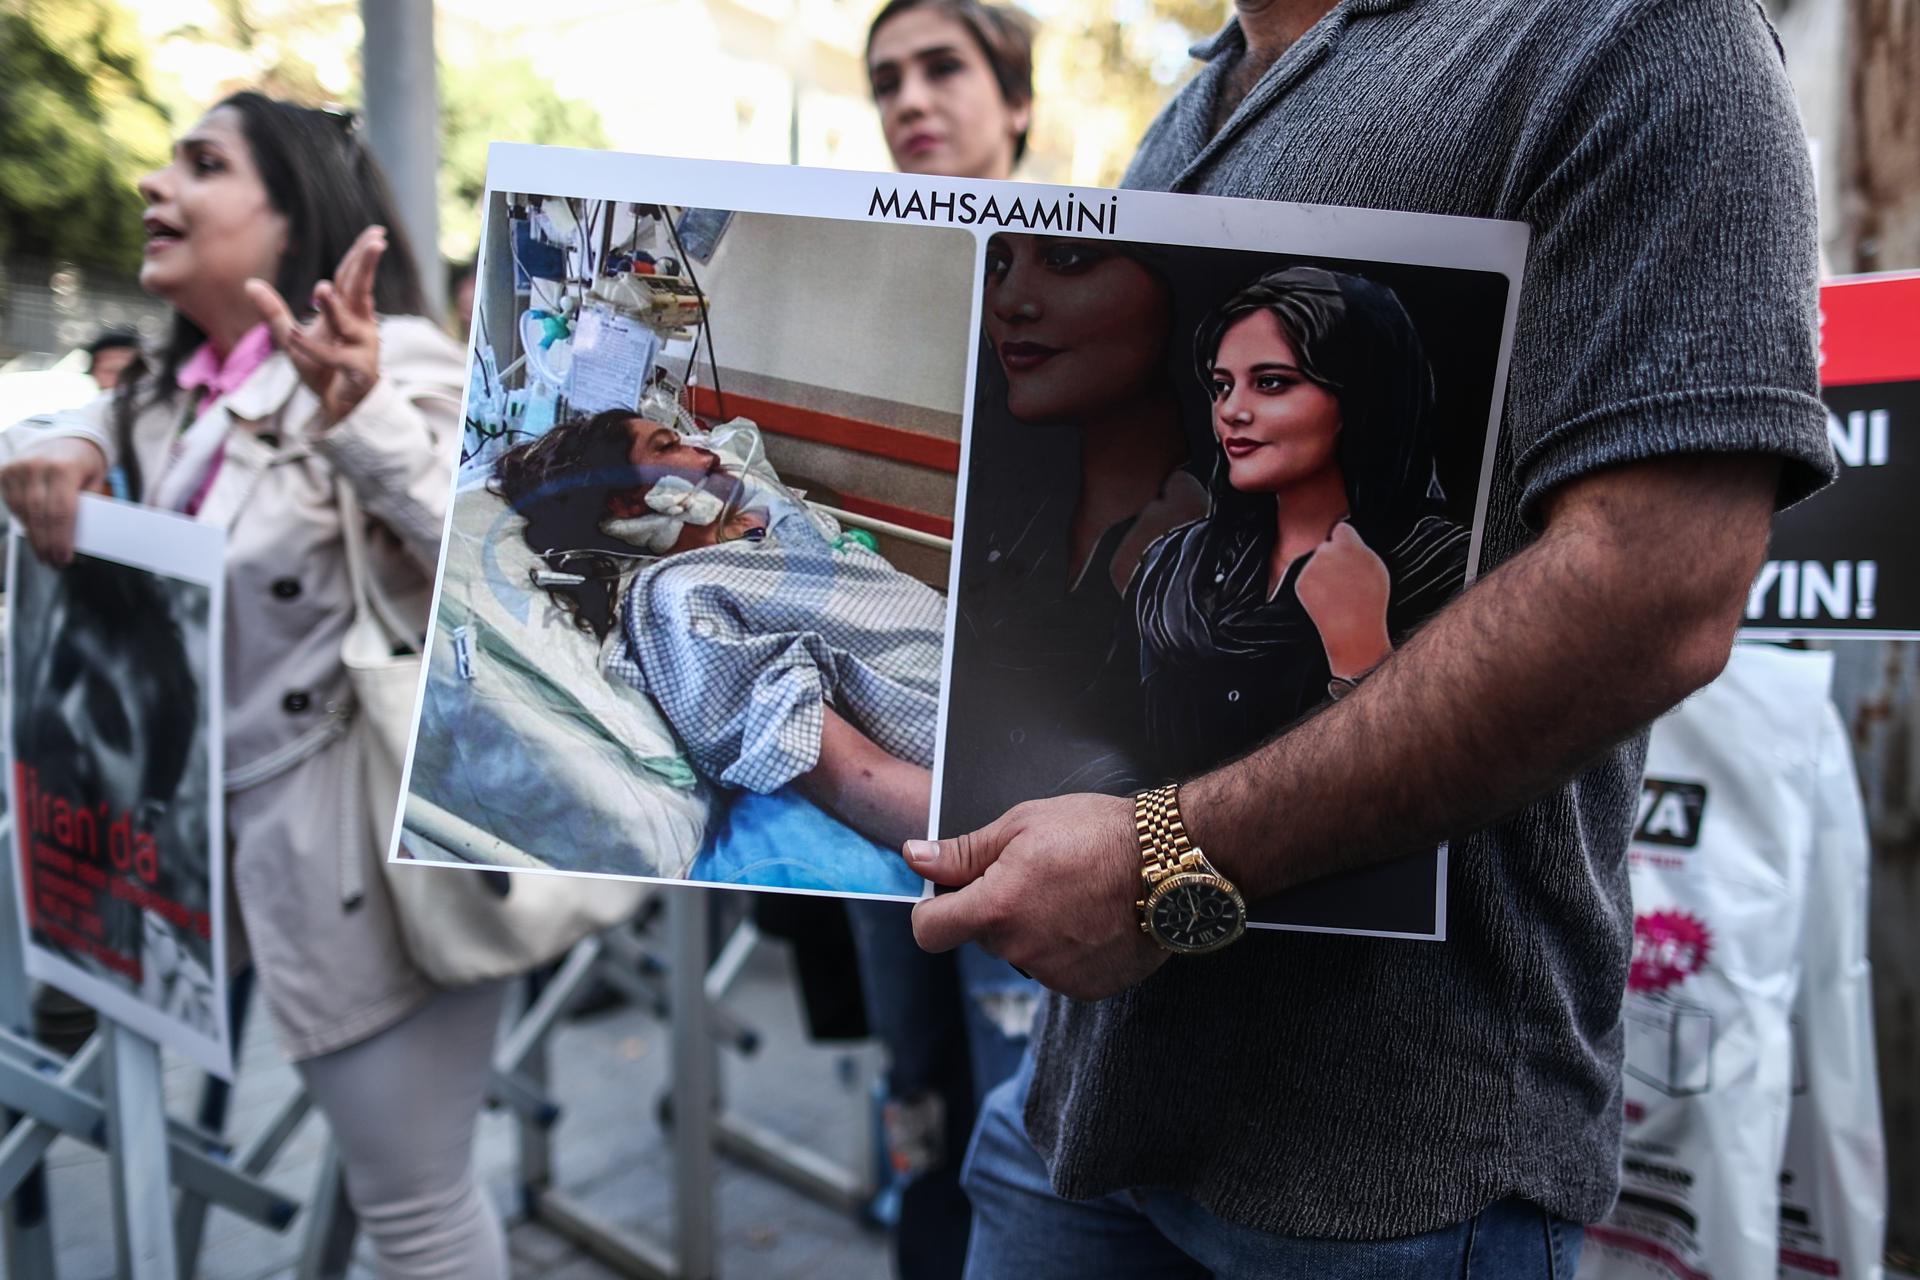 An Iranian man holds a picture of Mahsa Amini during a protest outside the Iranian Consulate following the death of Mahsa Amini, in Istanbul, Turkey, 26 September 2022. EFE/EPA/SEDAT SUNA